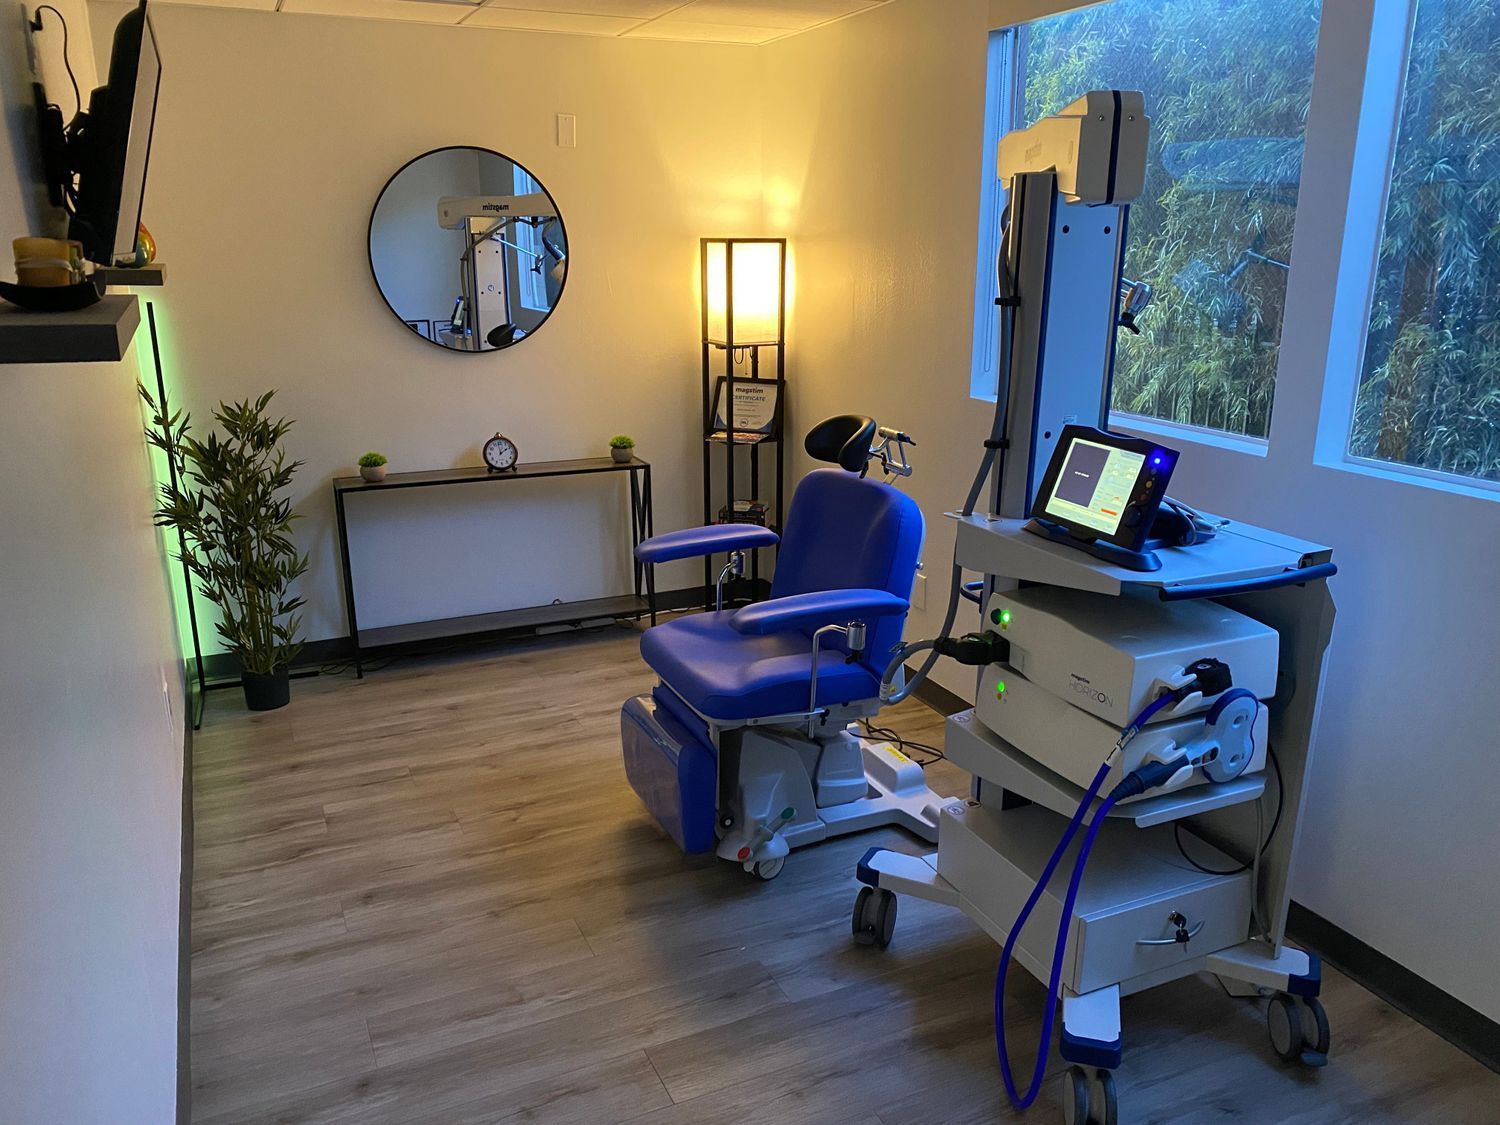 Gallery Photo of Transcranial Magnetic Stimulation (TMS) Room